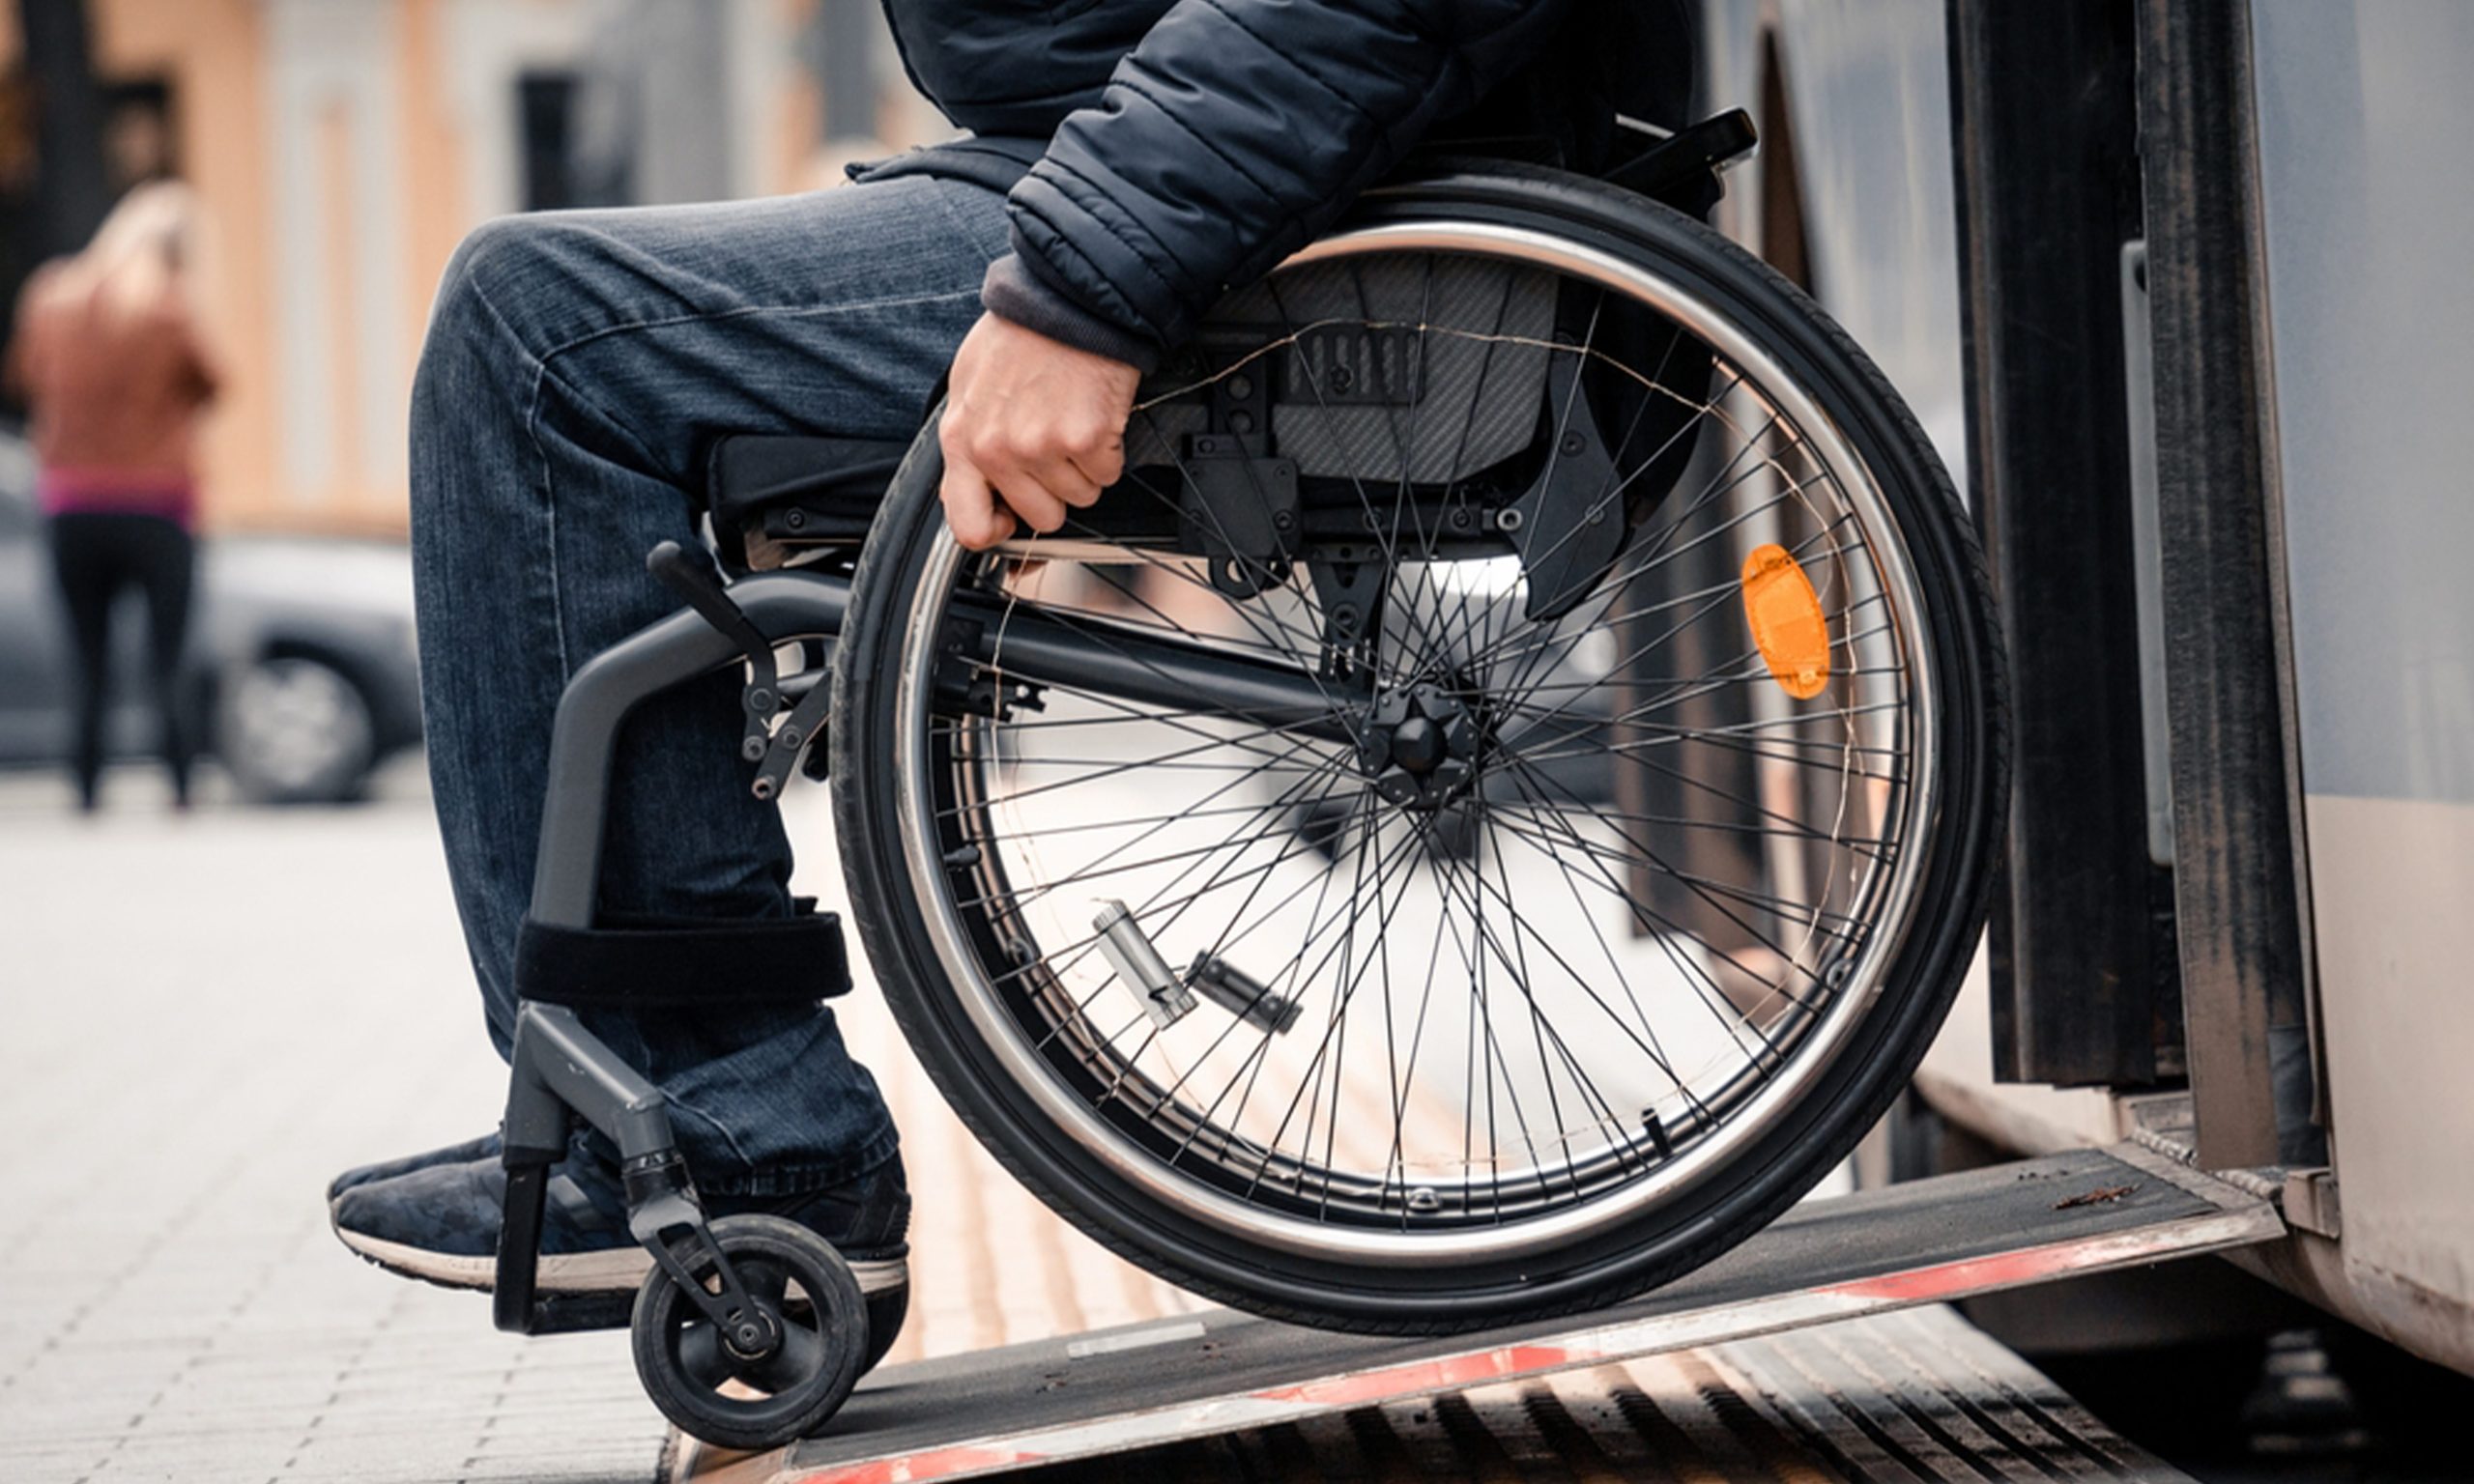 Motability Operations joins Urban Mobility Partnership to enhance passenger accessibility